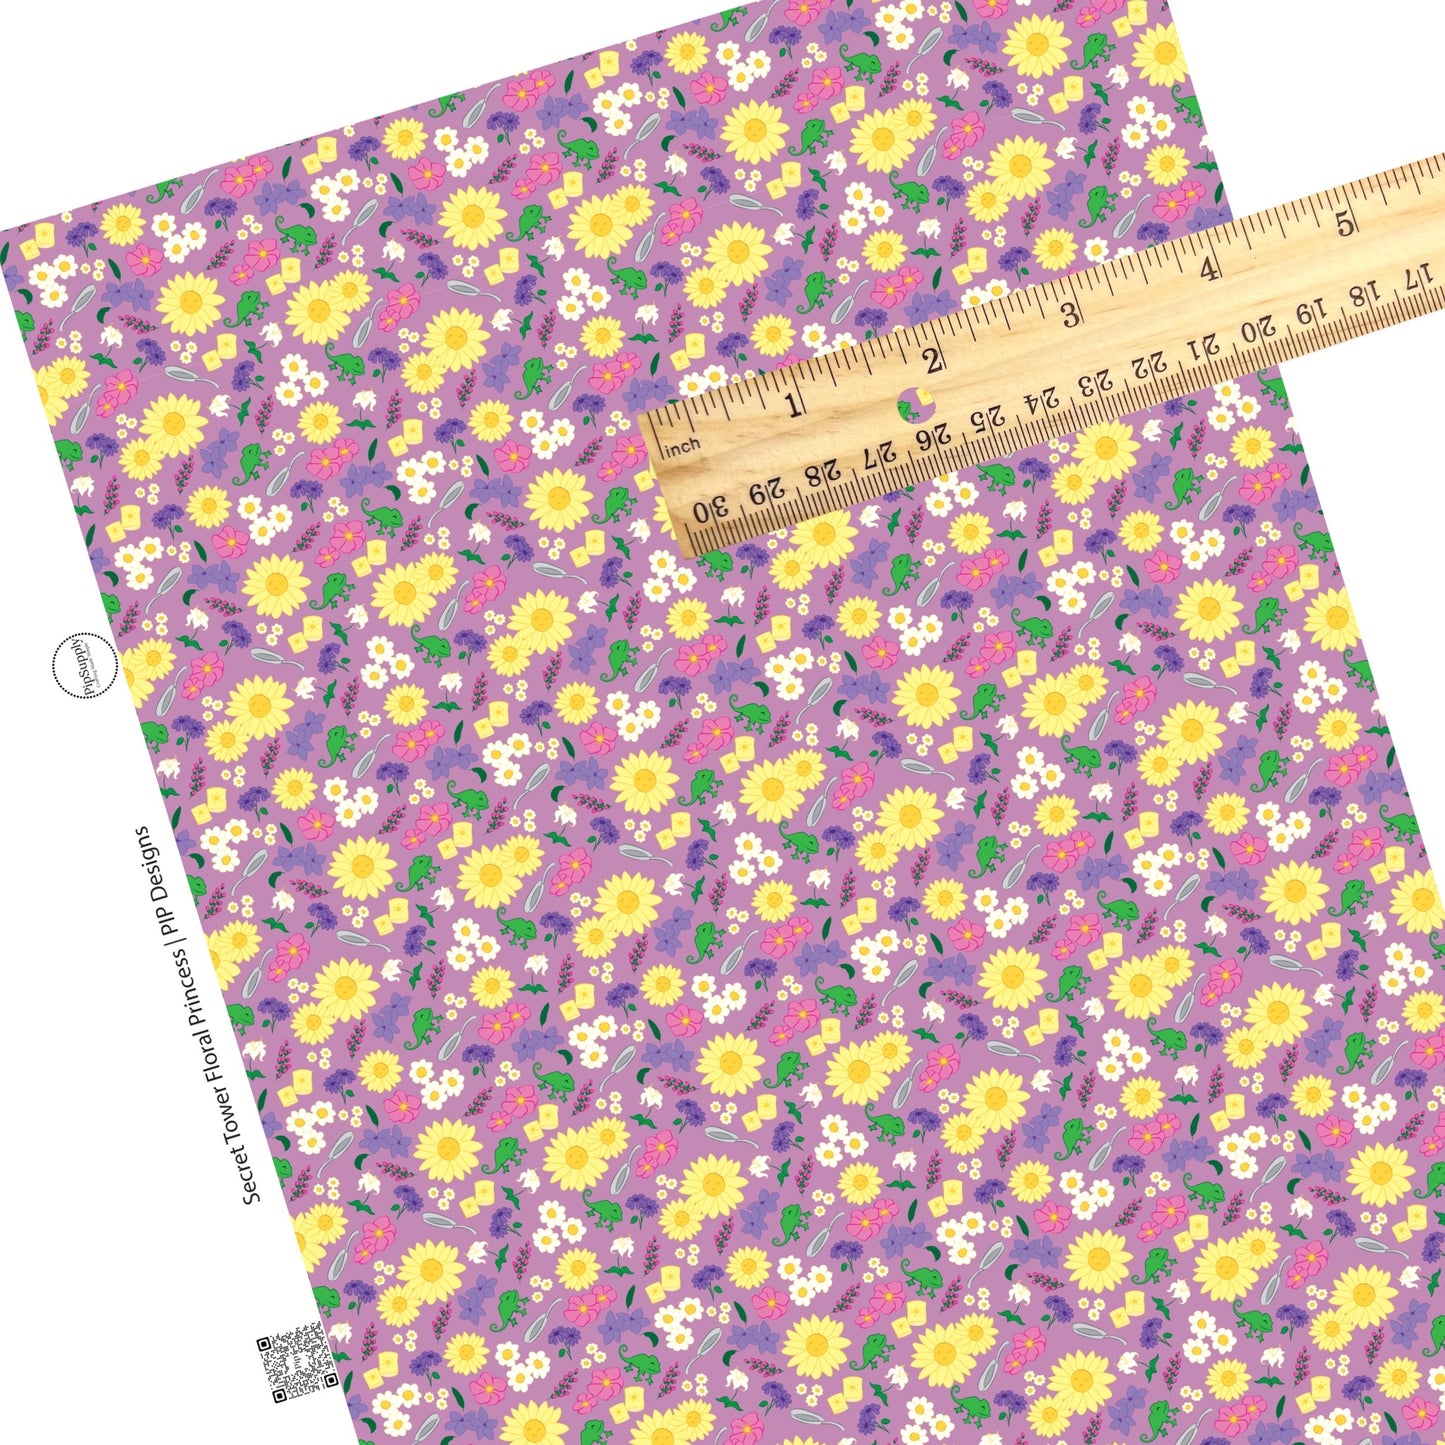 Yellow flowers, green animals, and frying pan on purple faux leather sheets